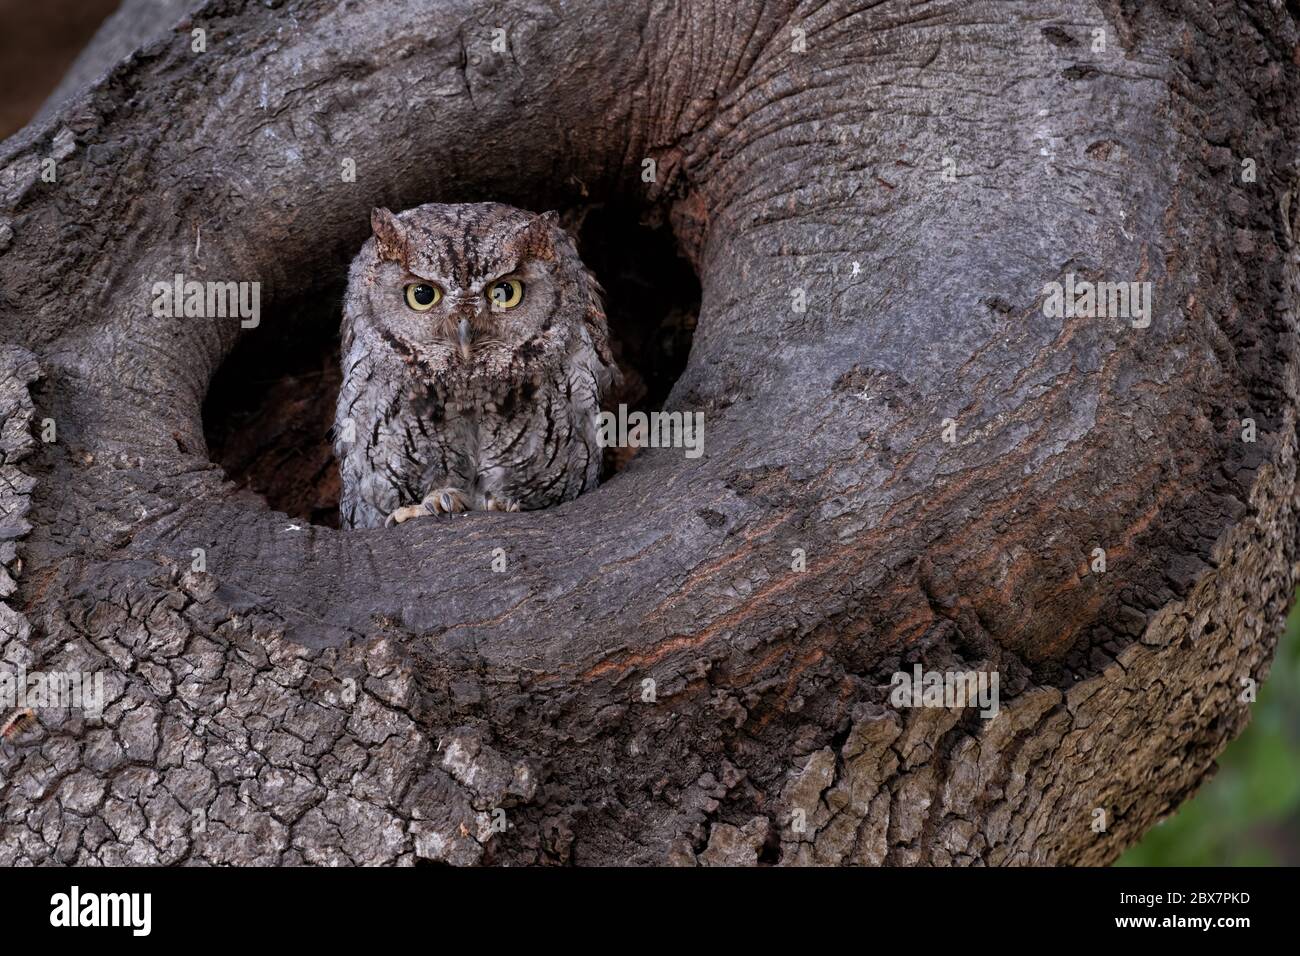 A Western Screech Owl peers out of an oak cavity before heading out for a nocturnal hunt. Stock Photo